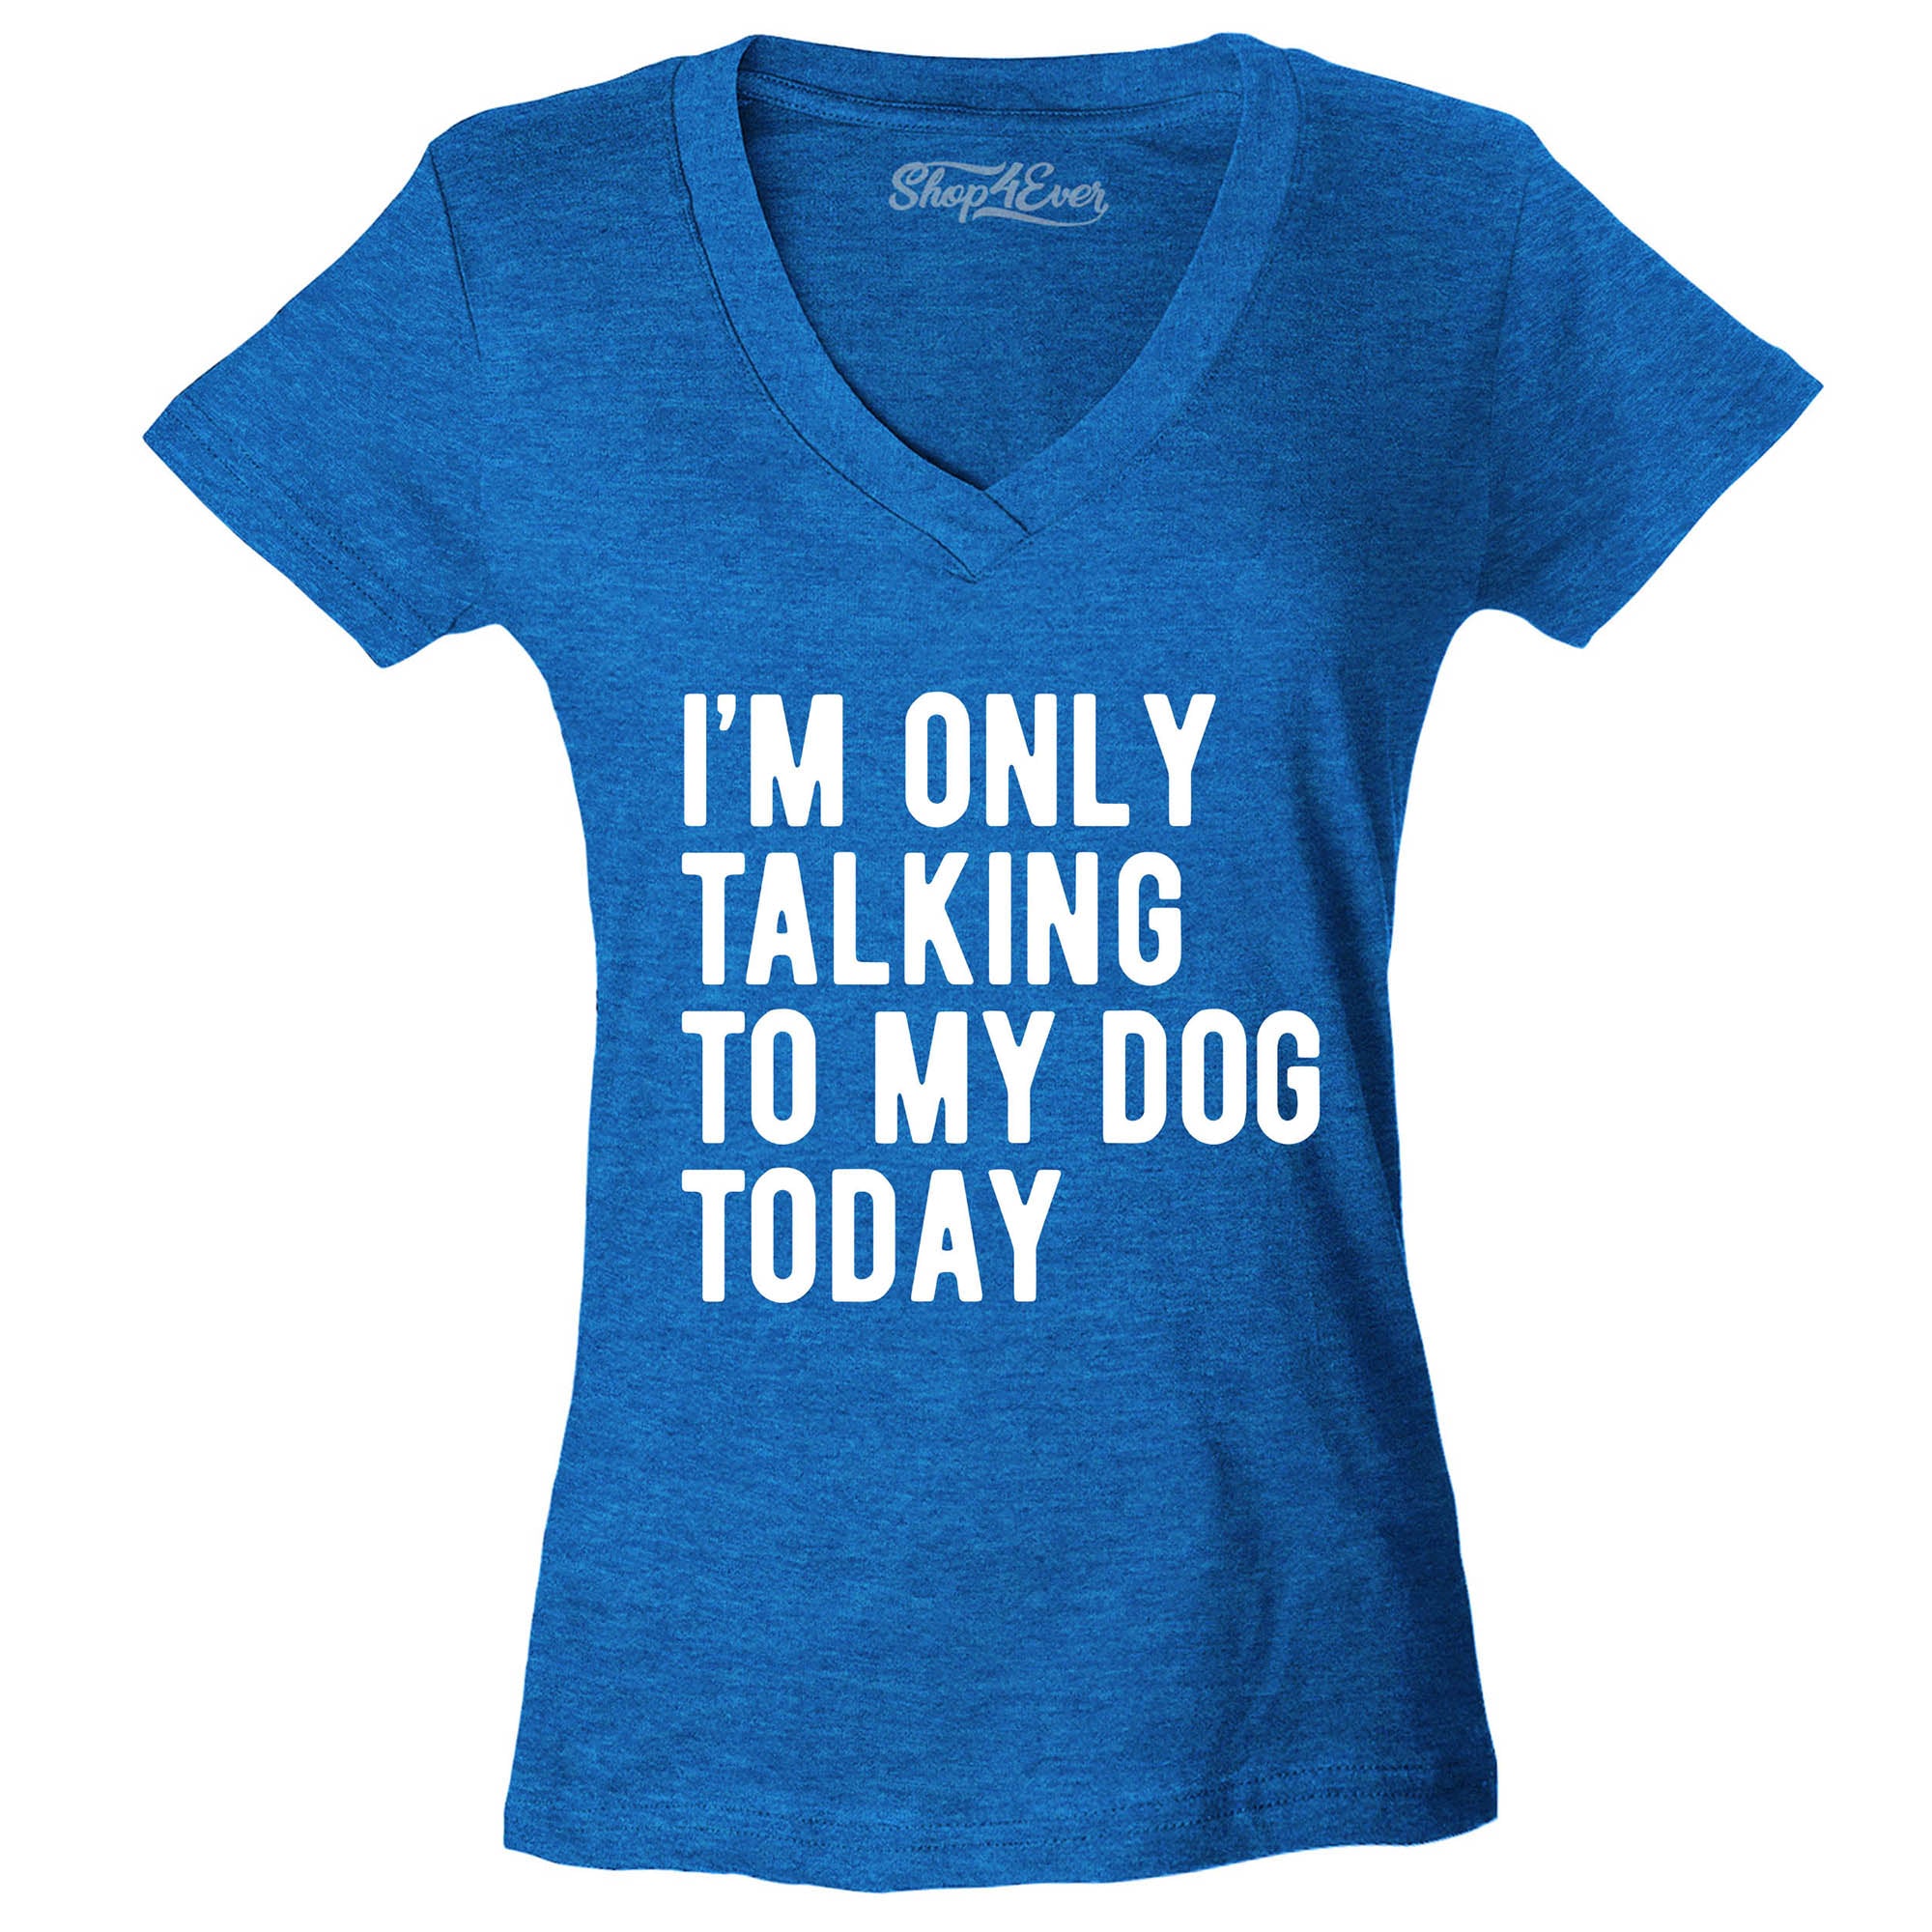 I'm Only Talking to My Dog Today Women's V-Neck T-Shirt Slim Fit